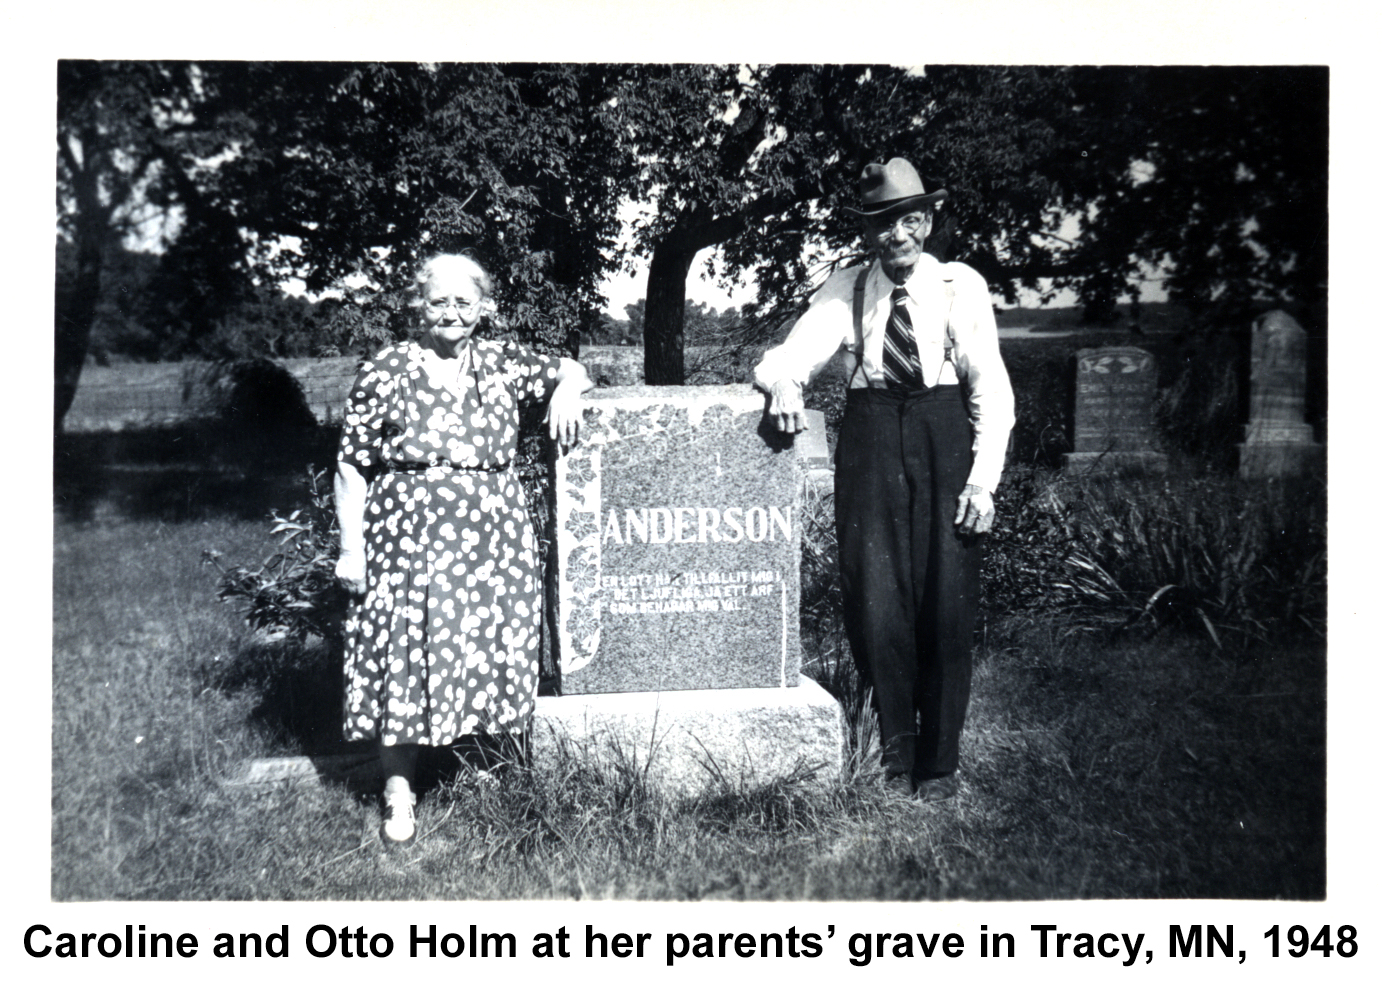 Caroline and Otto Holm are standing on either
       side of a large stone marker for her Anderson parents. The inscription
       is in Swedish